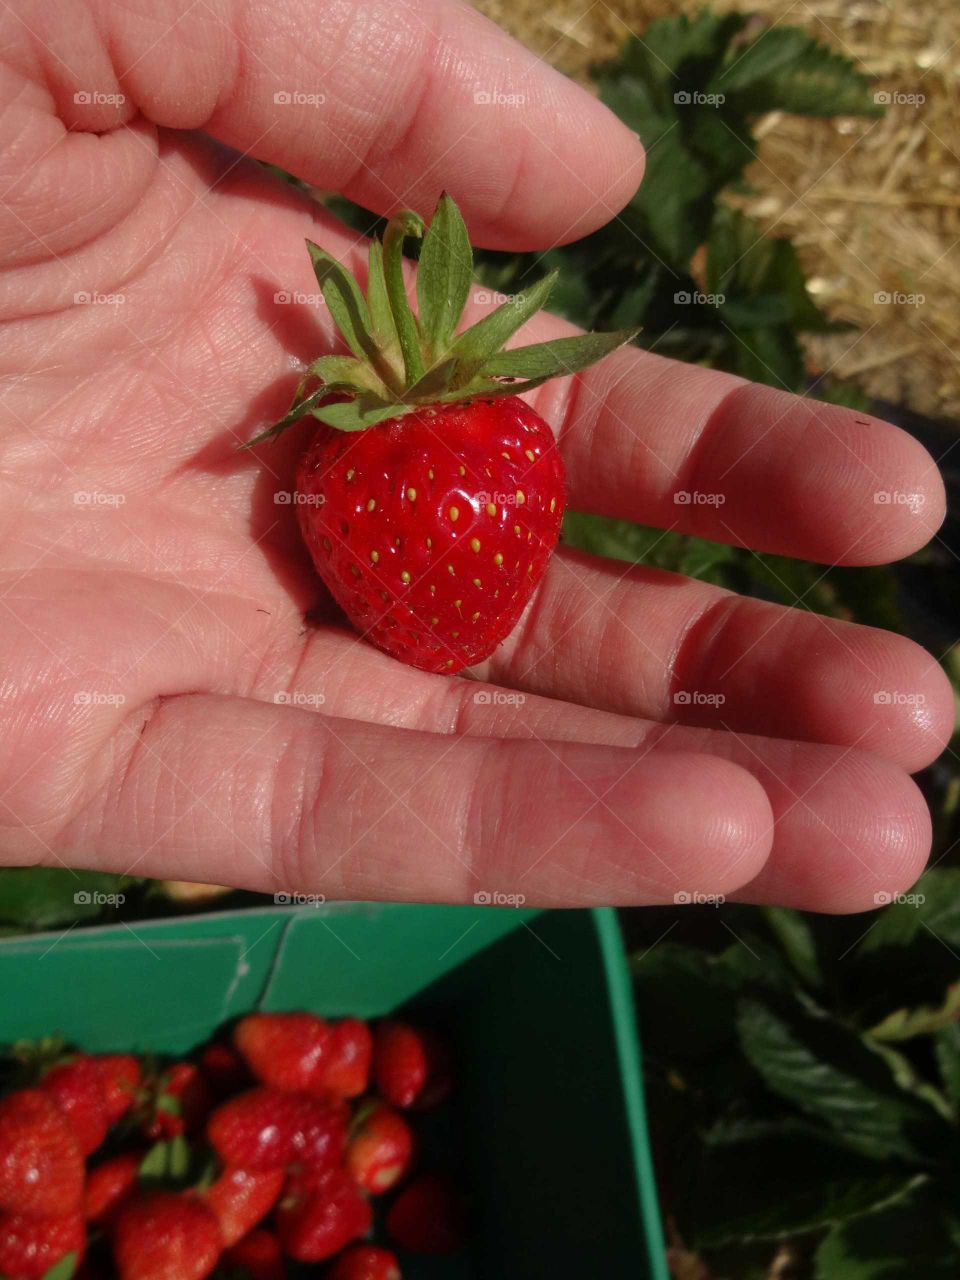 find some beautiful strawberry. strawberry time